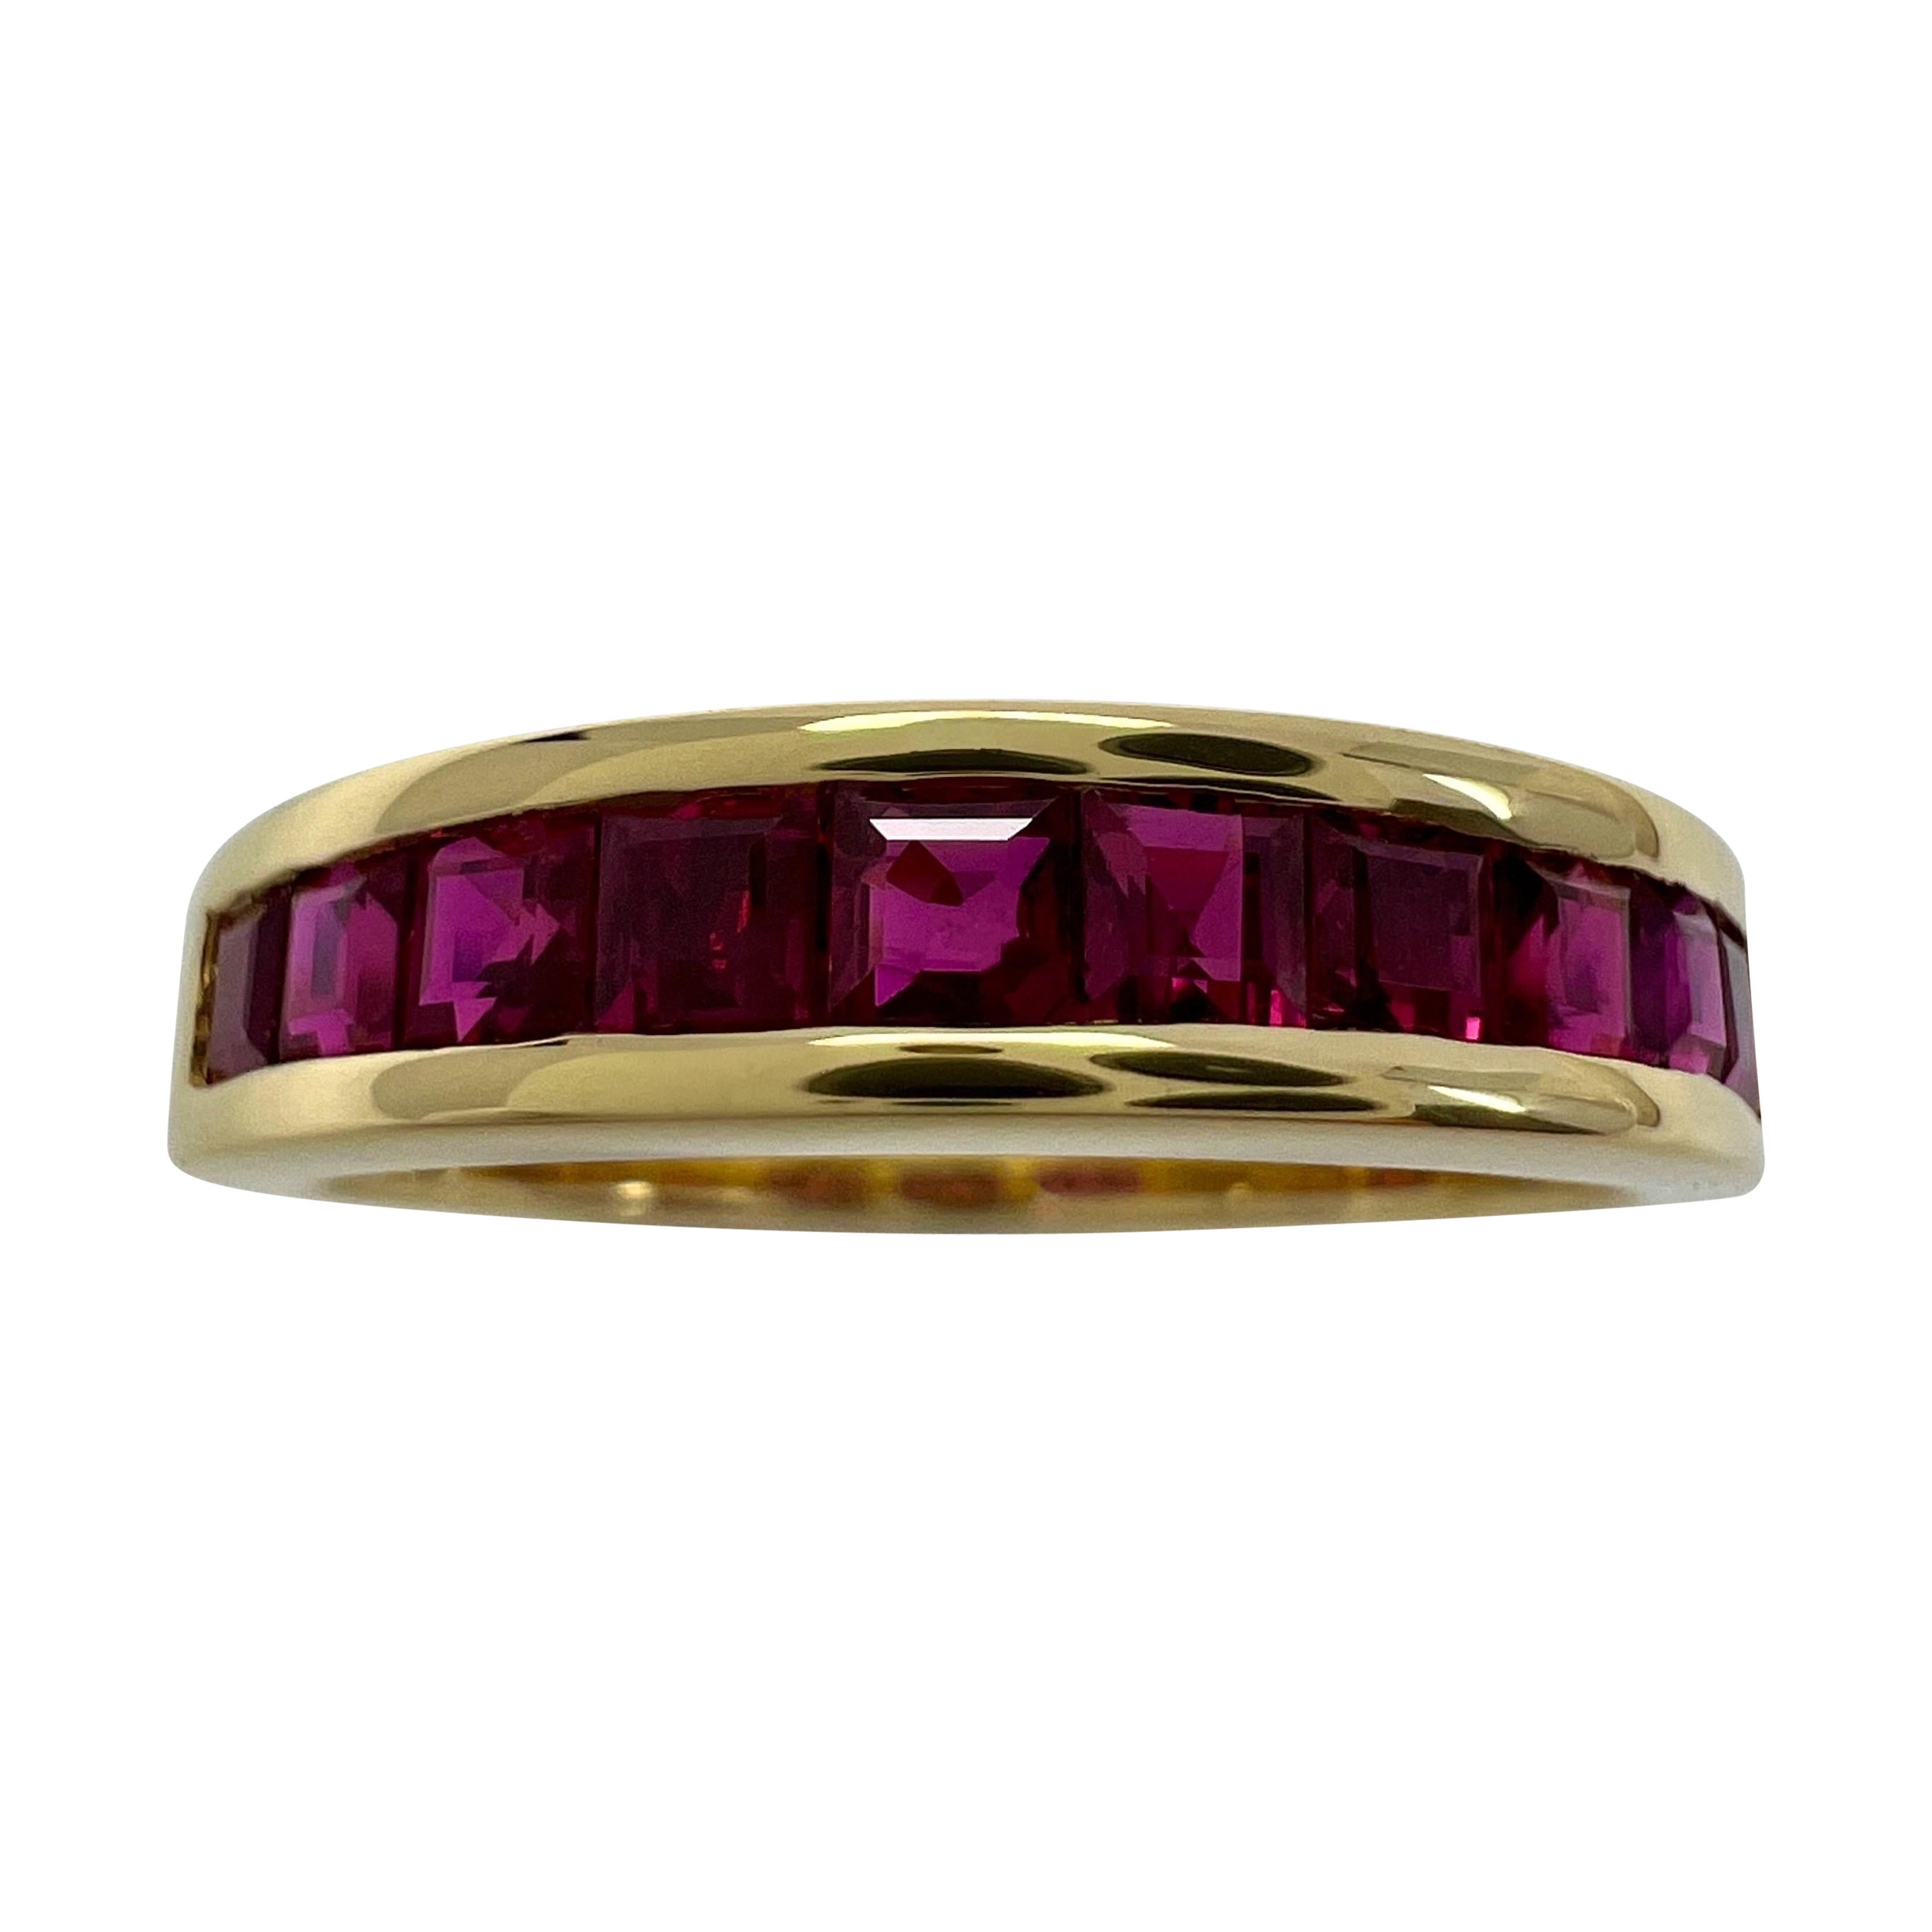 Tiffany & Co. Red Ruby Square Princess Cut 18k Yellow Gold Eternity Band Ring